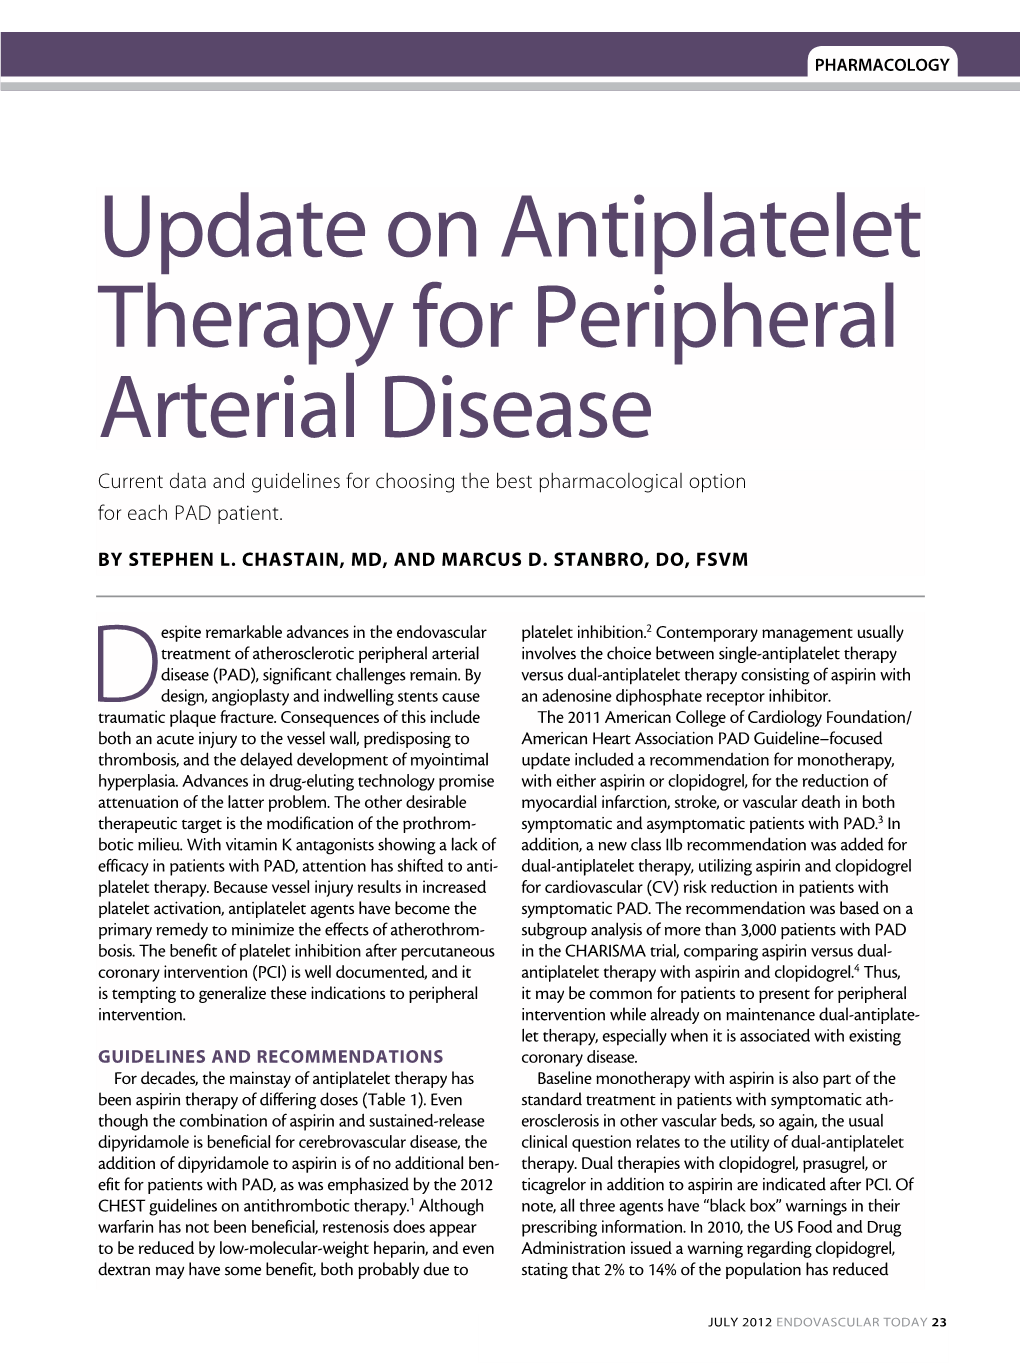 Update on Antiplatelet Therapy for Peripheral Arterial Disease Current Data and Guidelines for Choosing the Best Pharmacological Option for Each PAD Patient